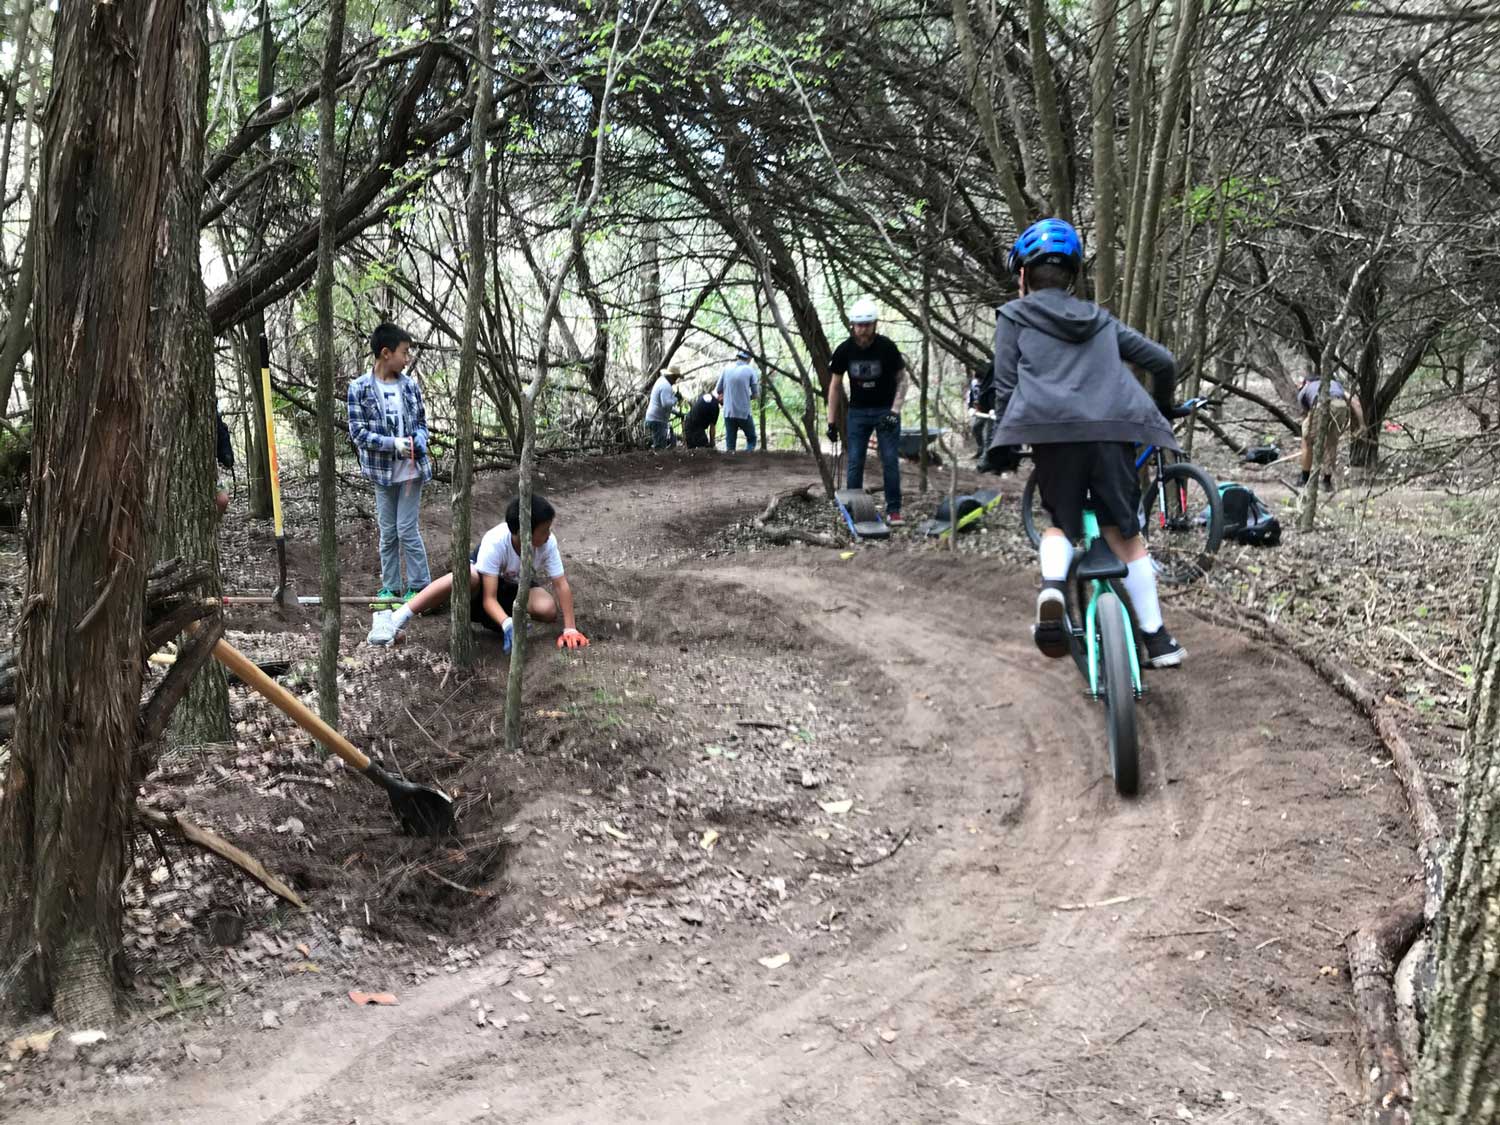 A young rider tests out a new trail.